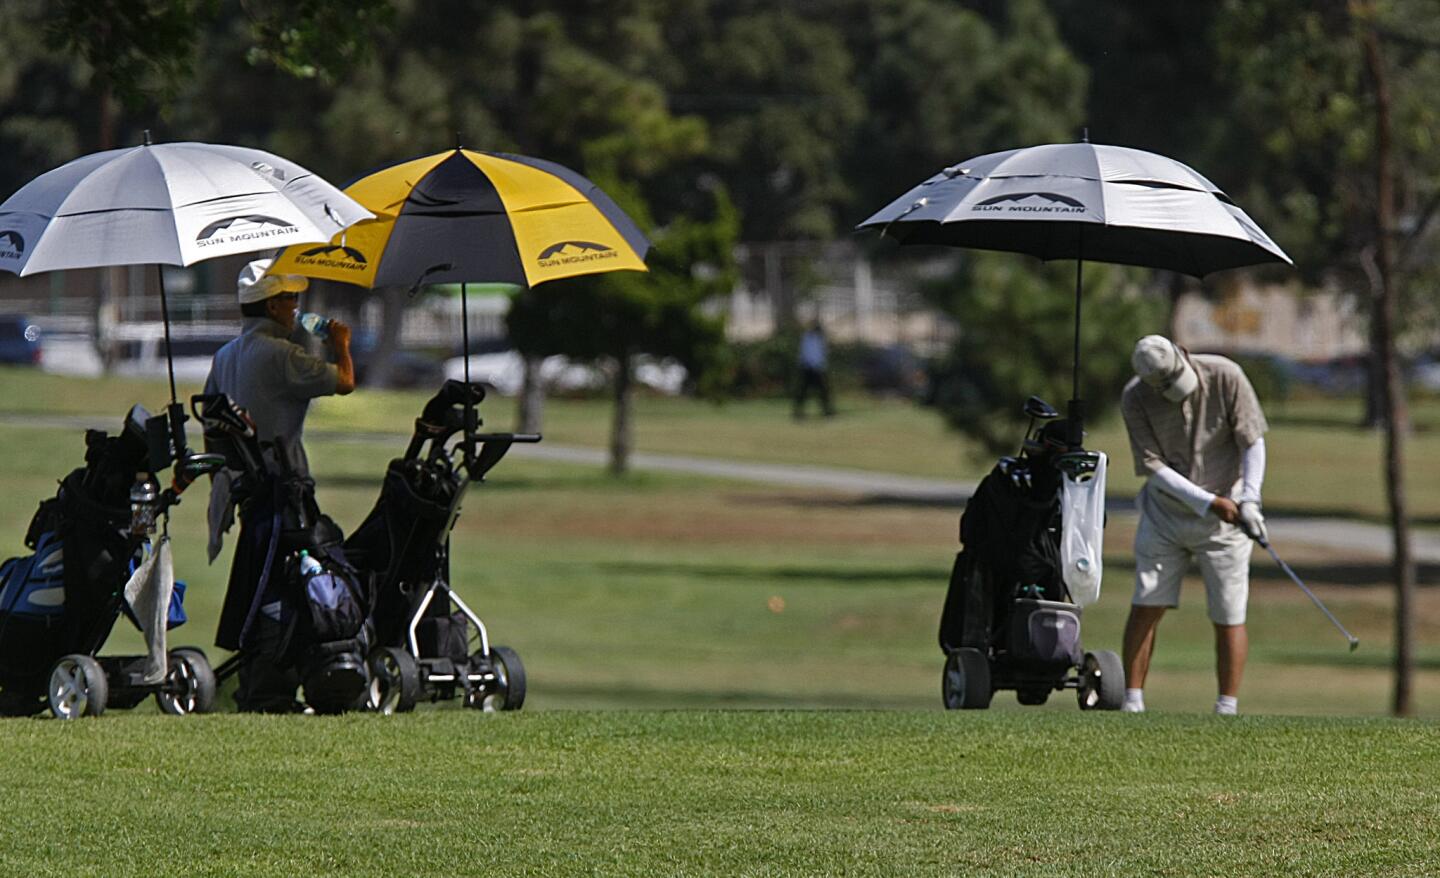 With early afternoon temperature in the mid-90s, golfers at Chester Washington Golf Course in Hawthorne carry umbrellas and ice water to beat the heat.